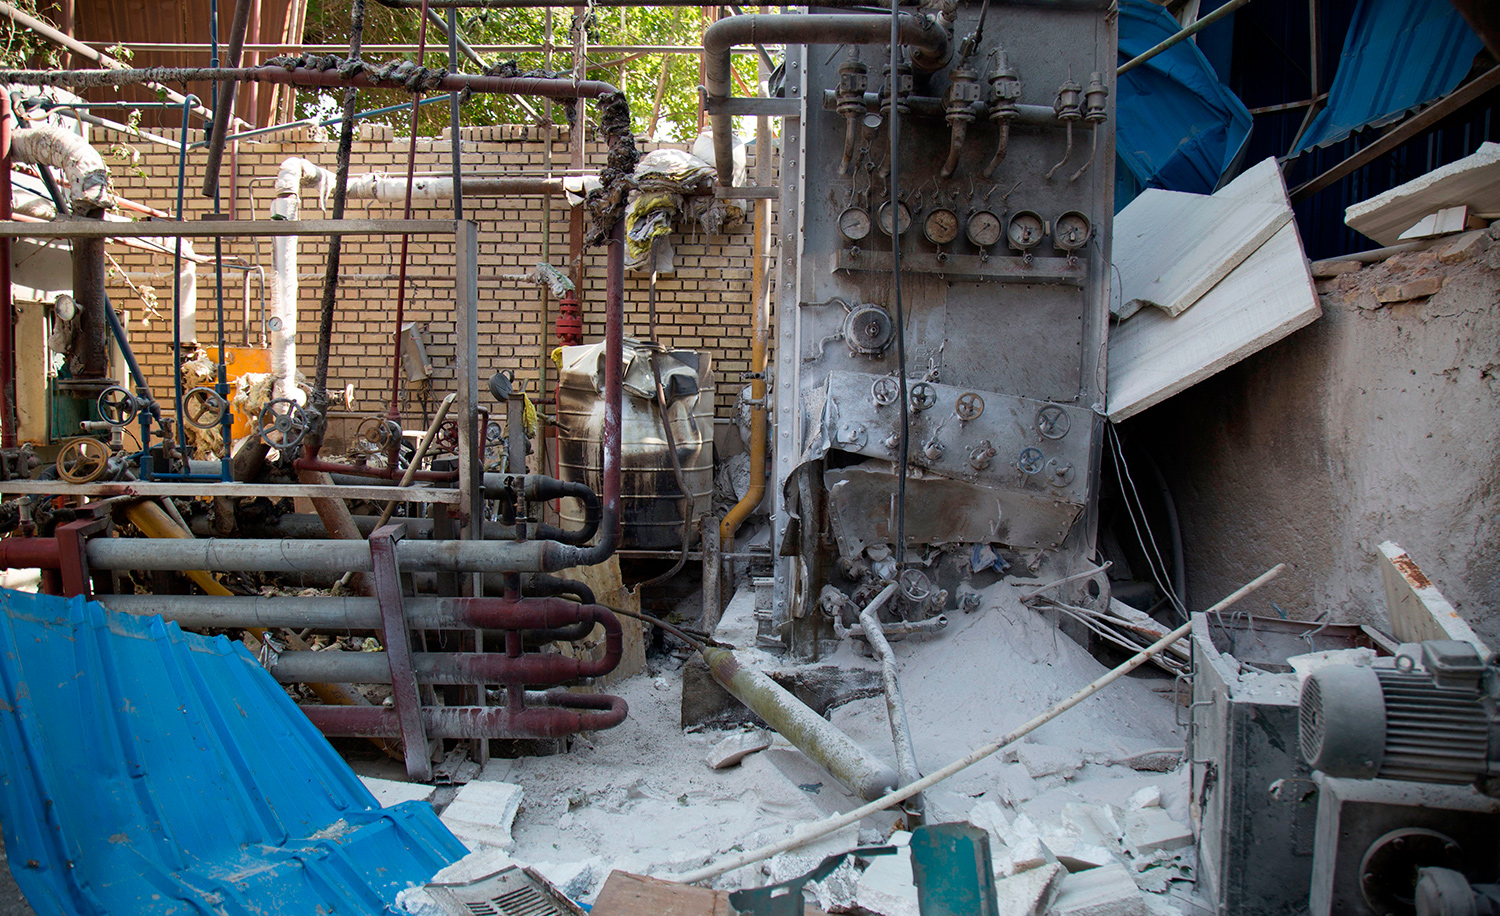 A picture taken on July 7, 2020, shows the aftermath of an explosion at an oxygen factory in the town of Baqershahr, south of Tehran. MEHDI KHANLARI/FARS NEWS/AFP via Getty Images.
